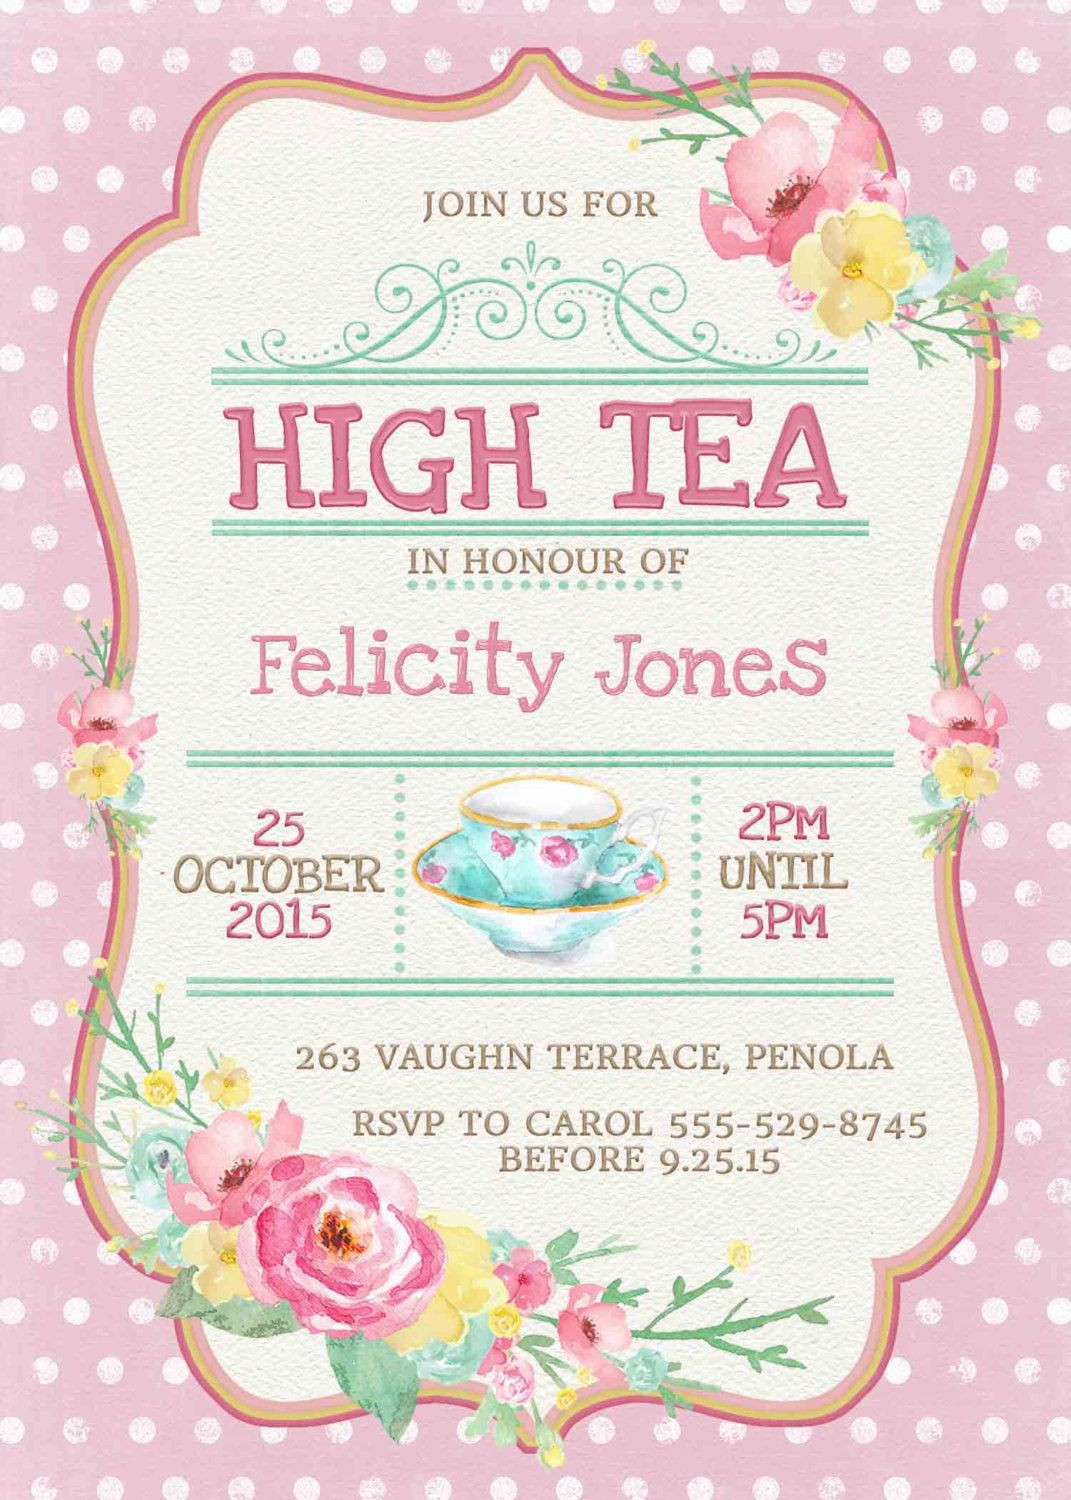 Tea Party Invitation Ideas
 Kitchen Tea Invitation or High Tea by WestminsterPaperCo